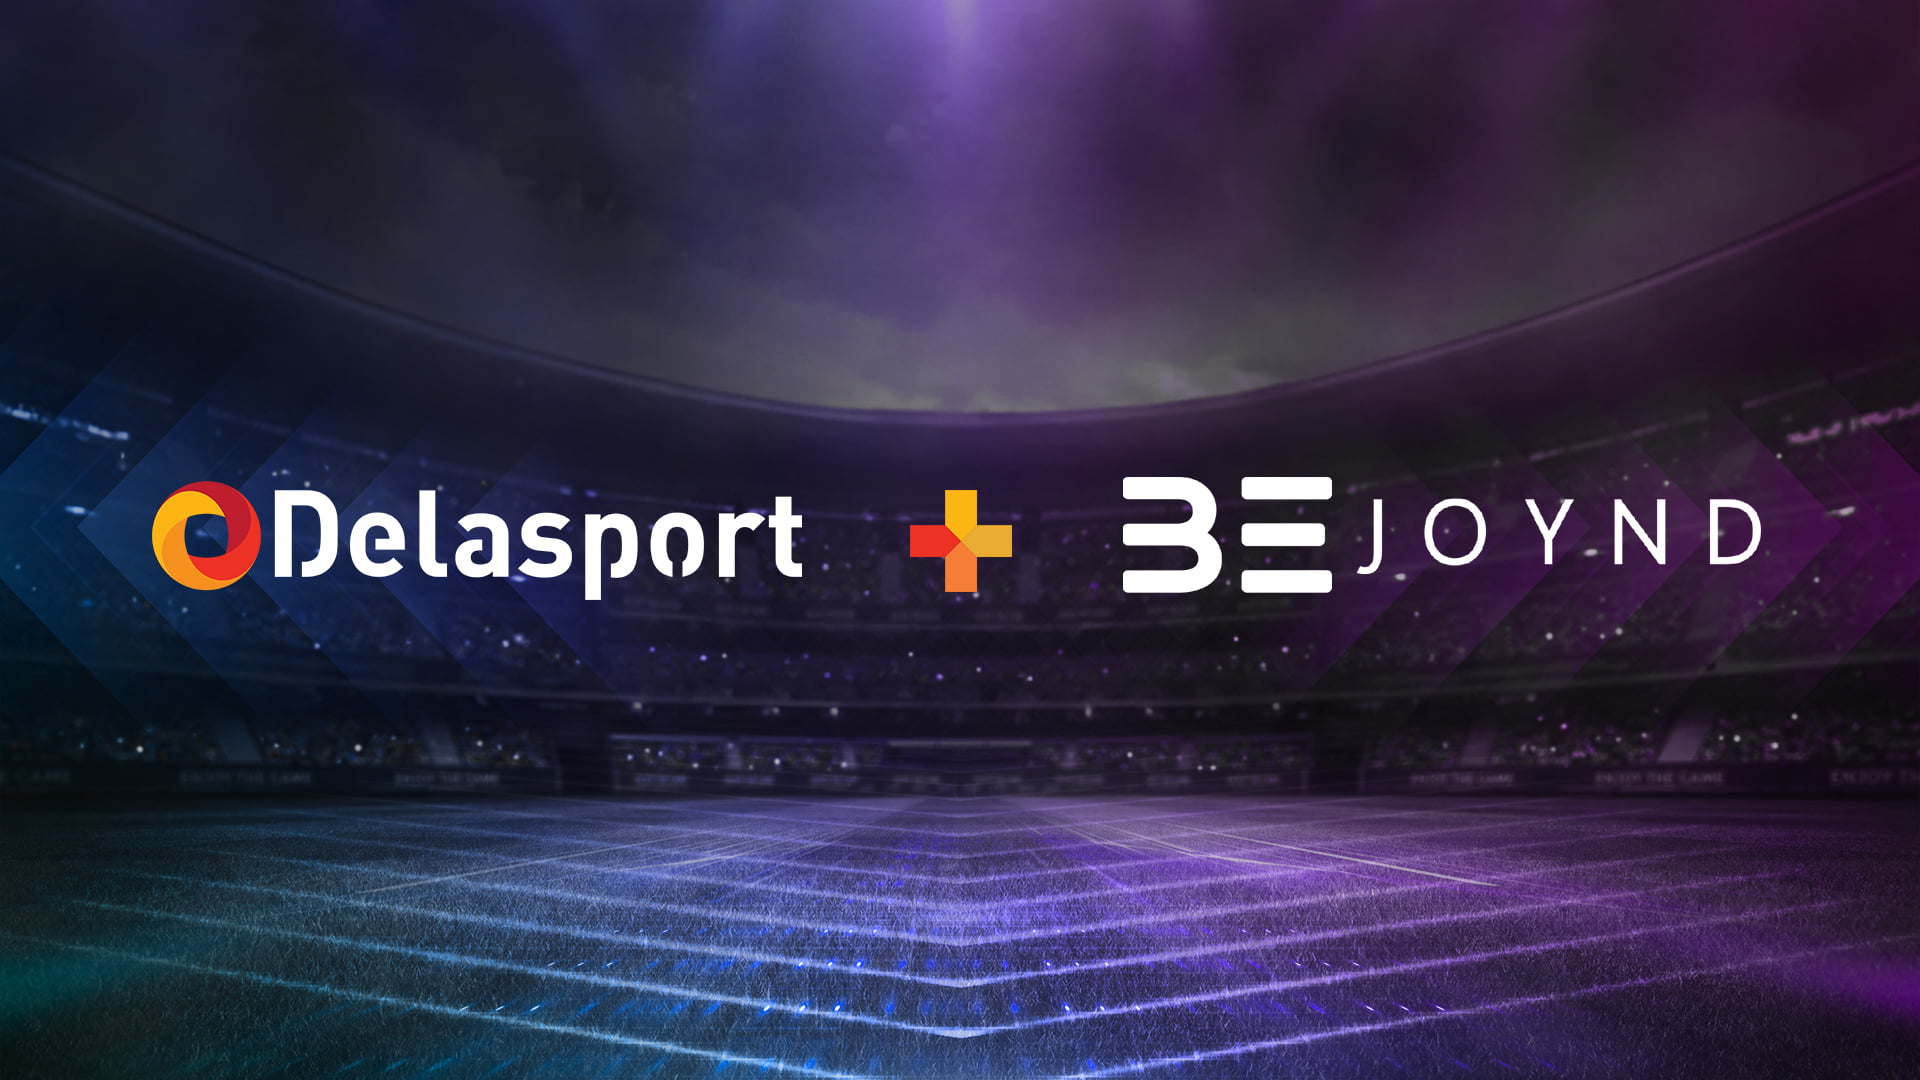 Delasport Joins Forces with Bejoynd to Enhance Sports Betting in the Nordics